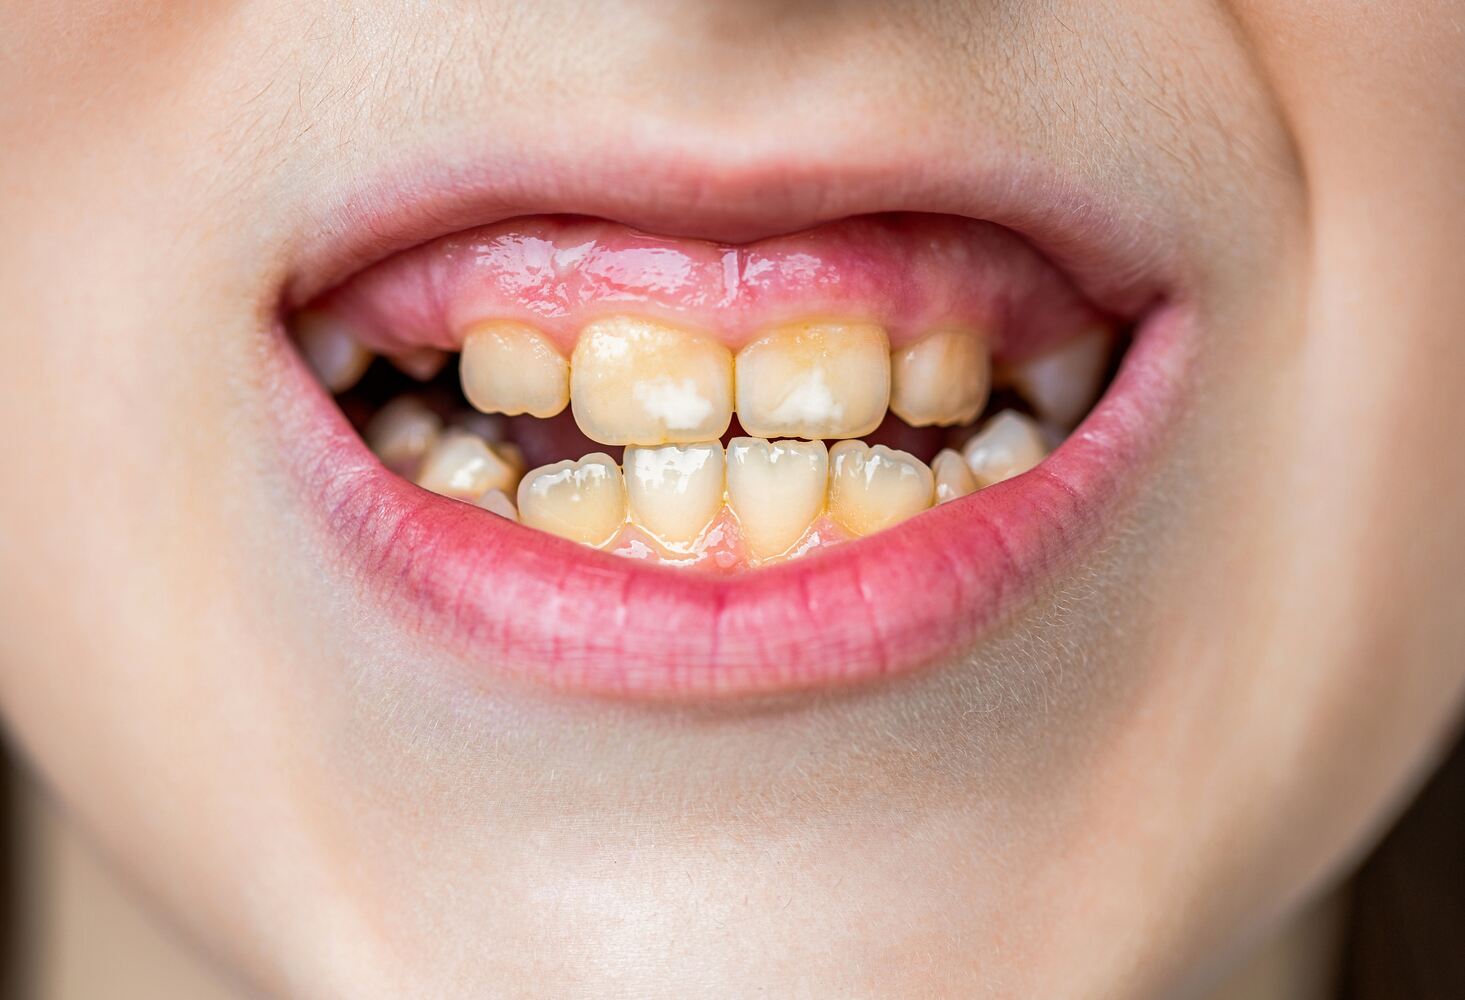 Toddler's teeth discolored